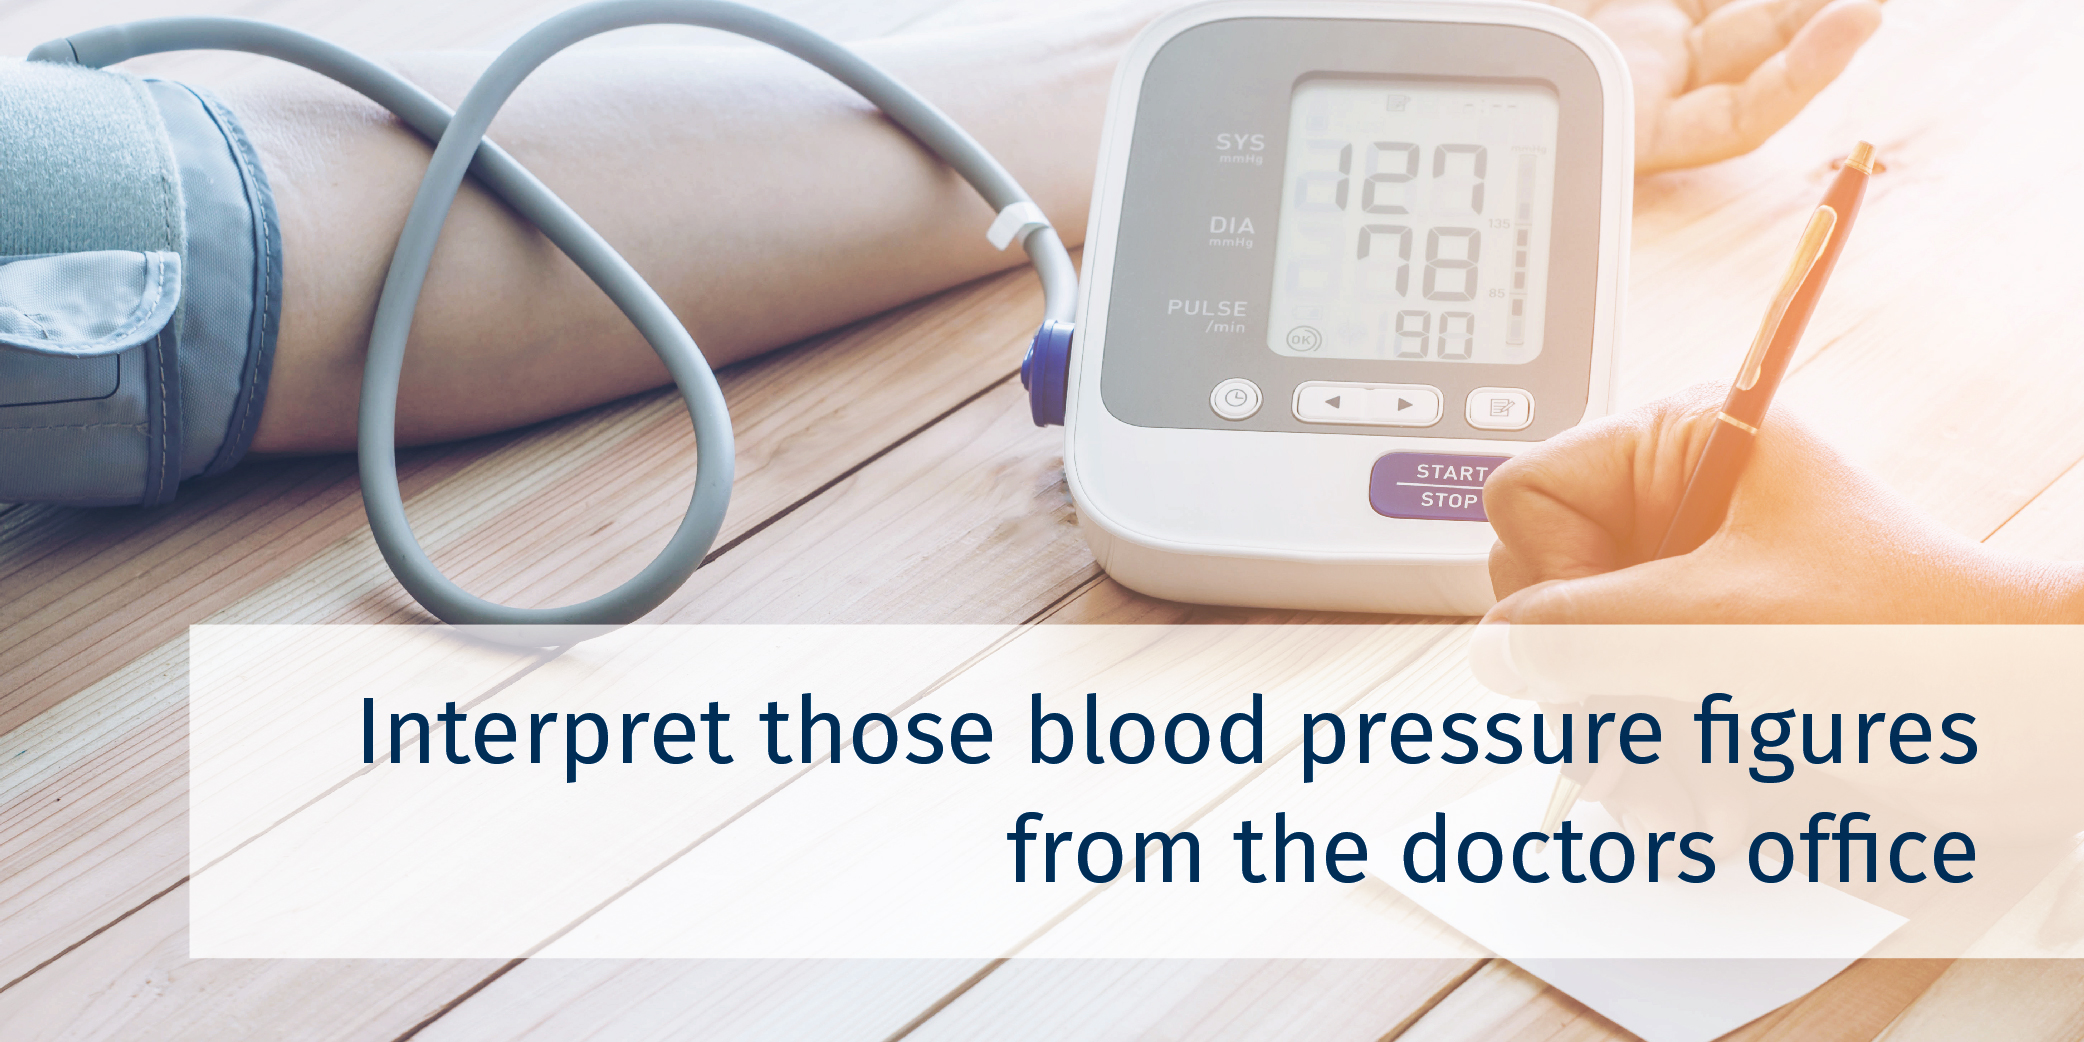 High Blood Pressure: What does it really mean to your health?